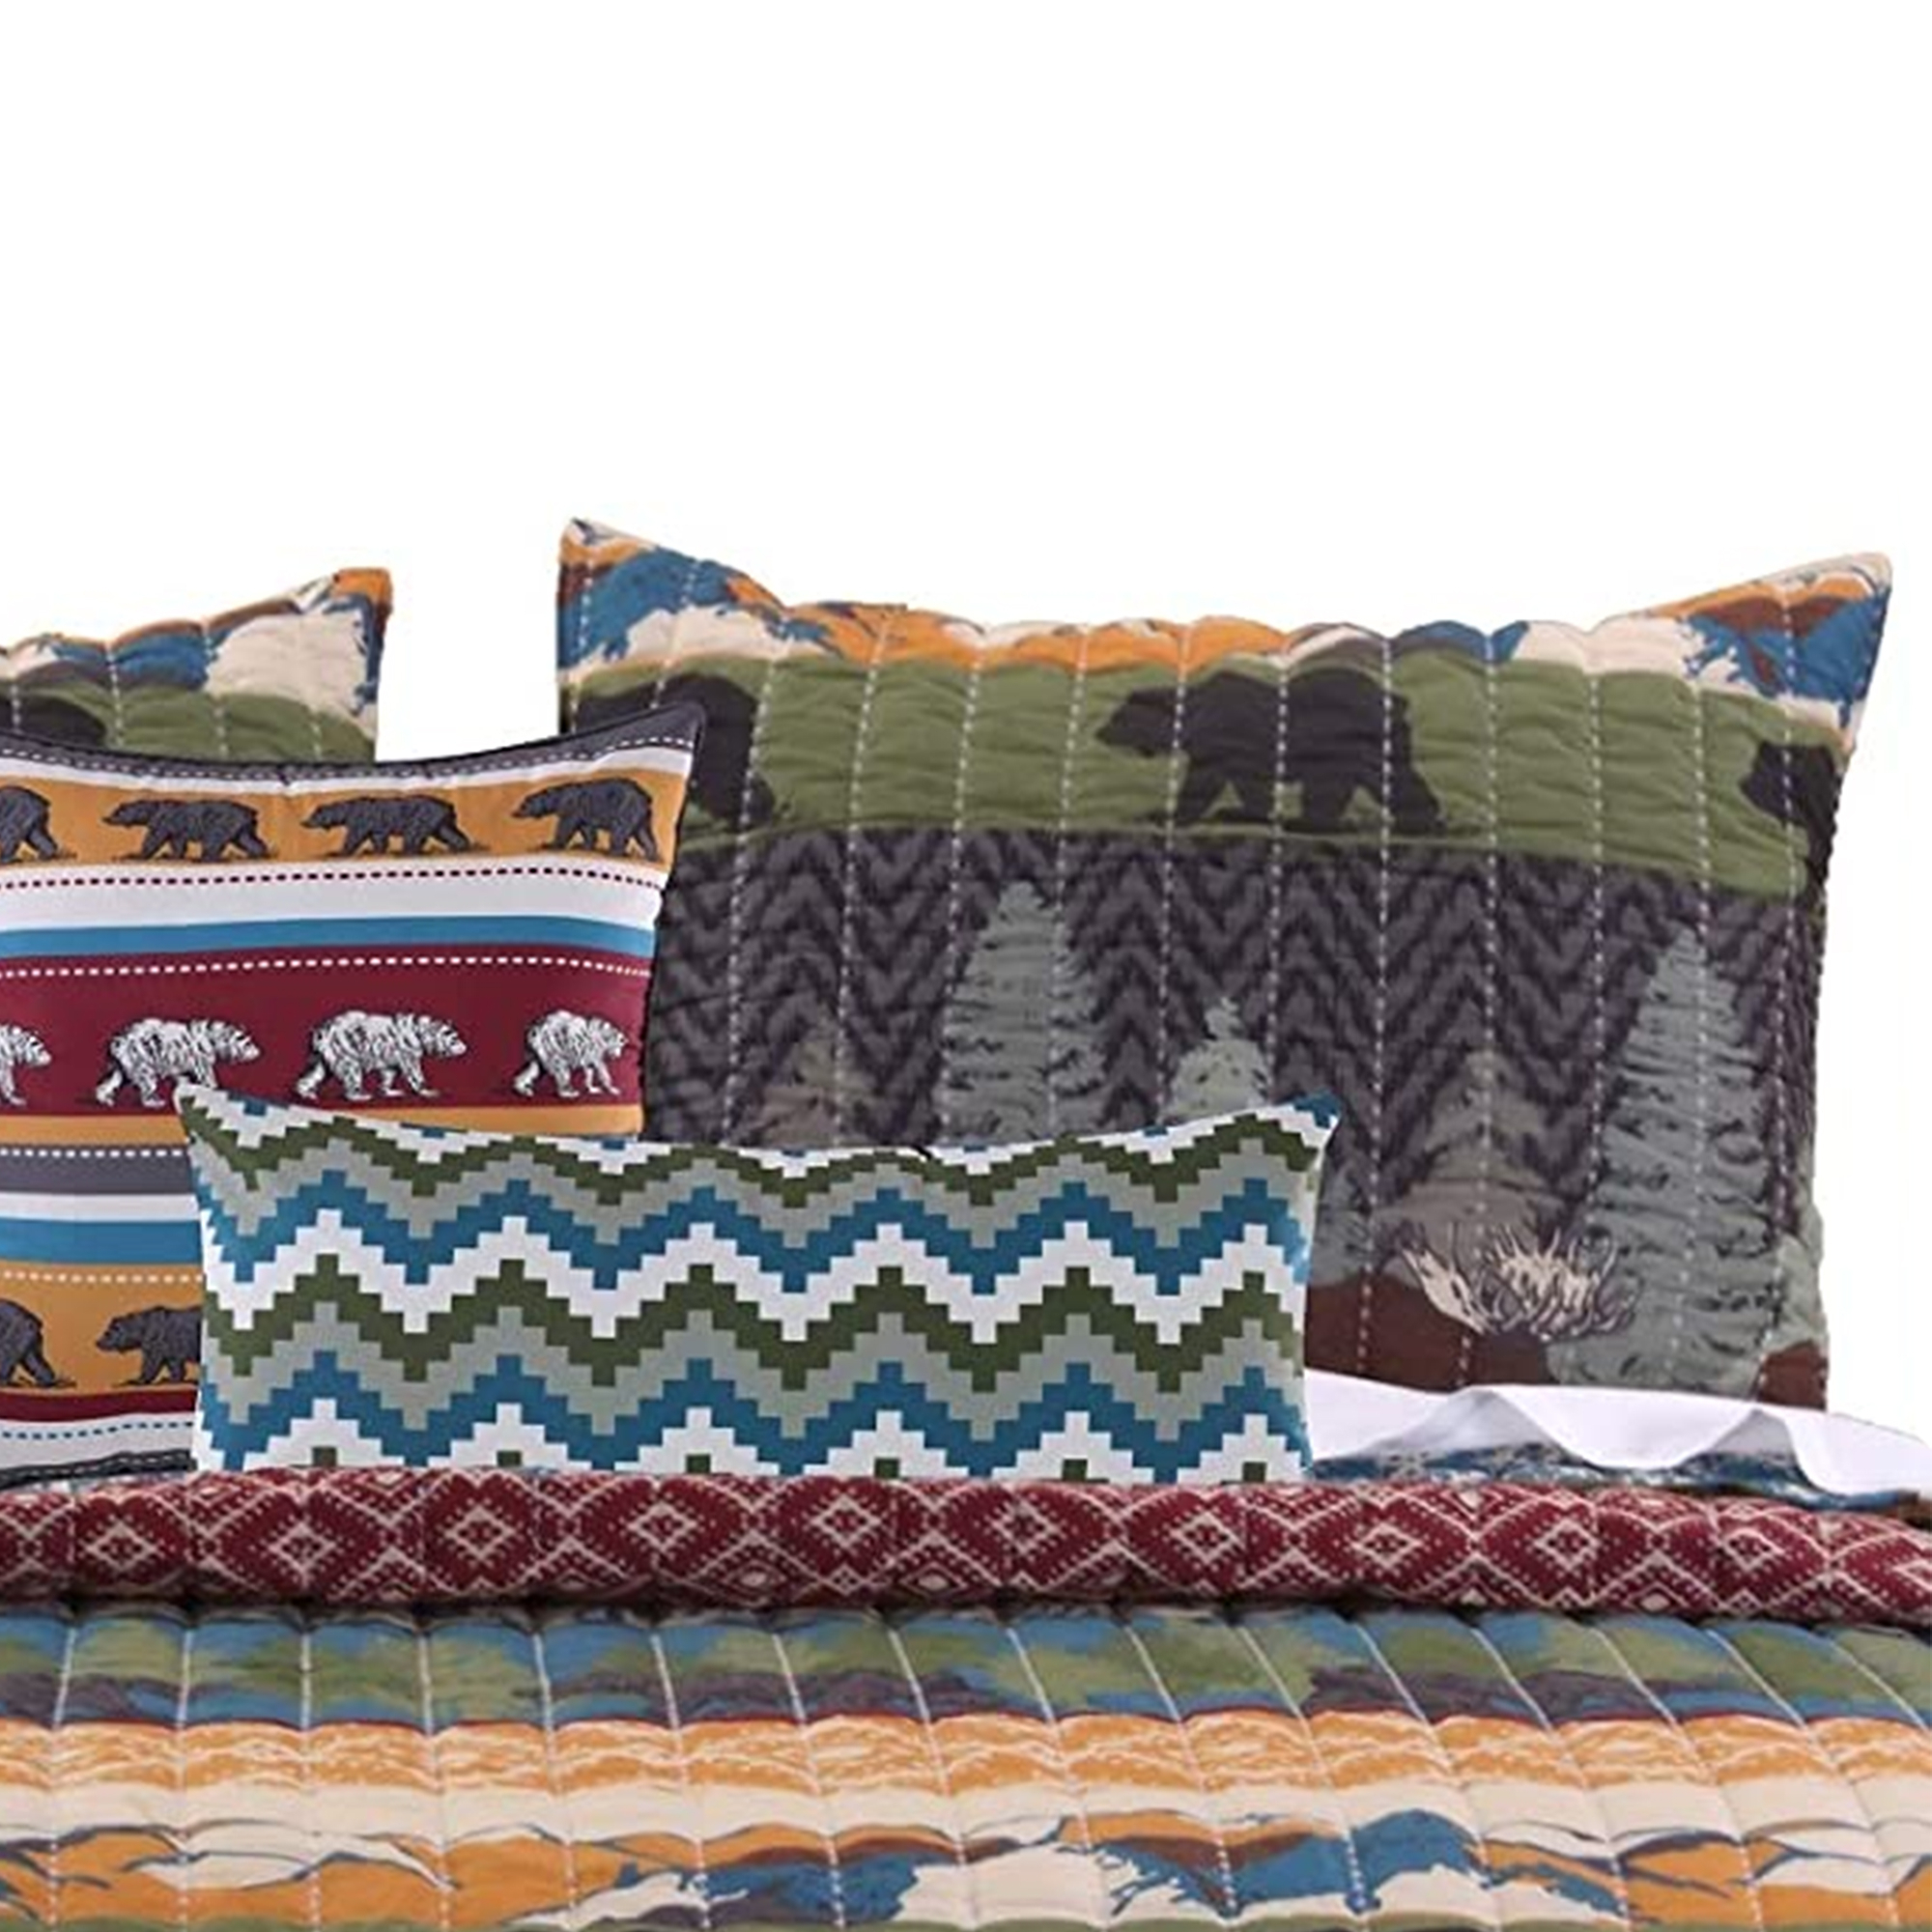 4 Piece Twin Size Quilt Set With Nature Inspired Print, Multicolor- Saltoro Sherpi